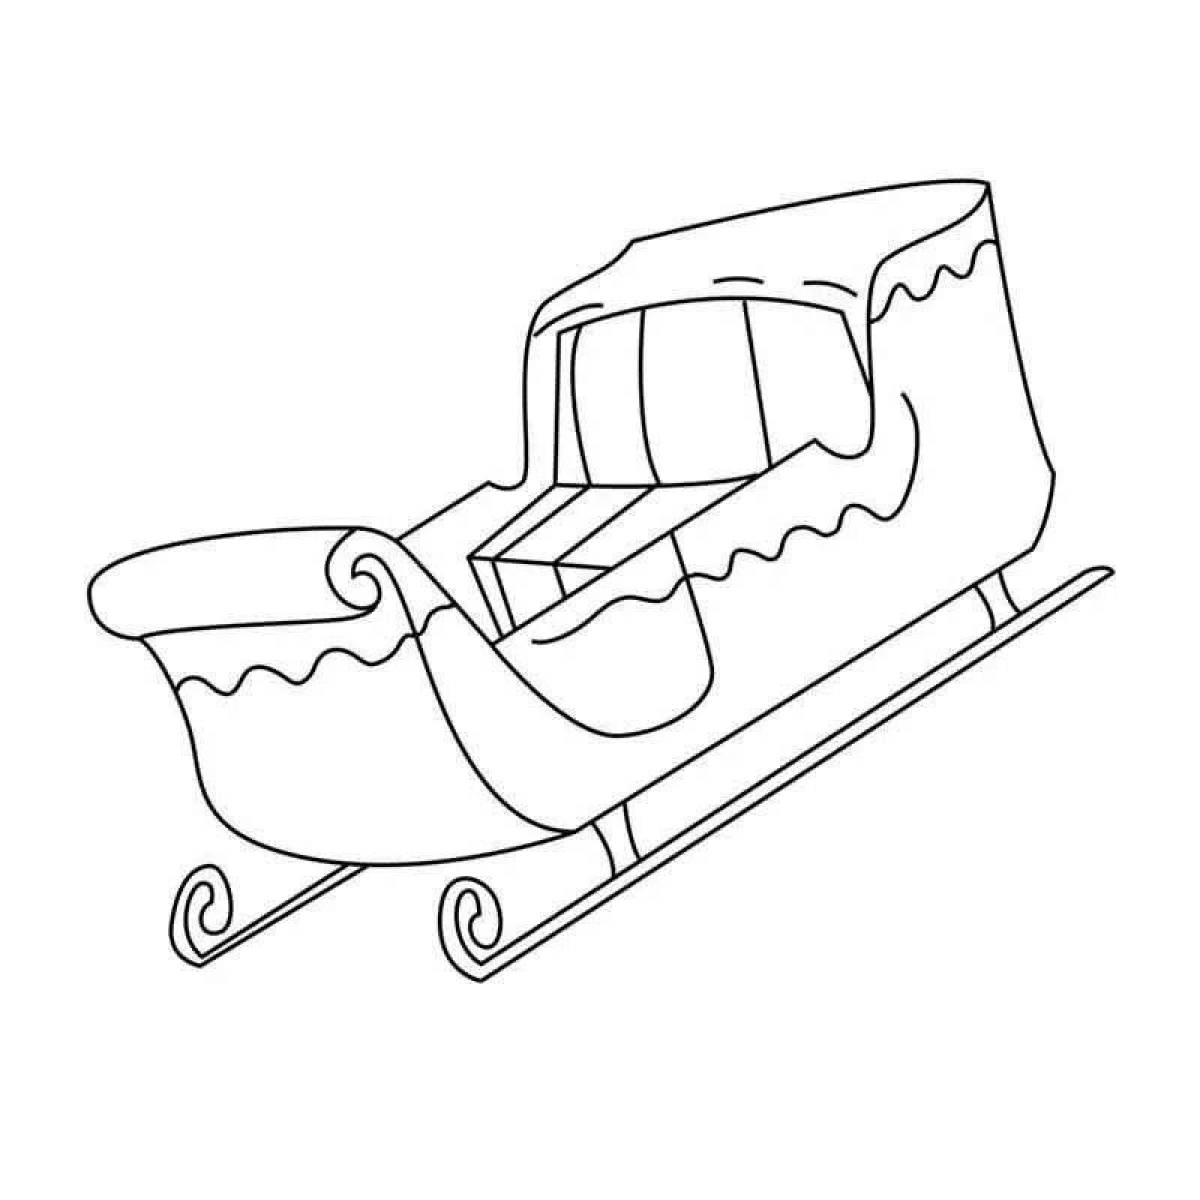 Adorable sleigh coloring book for 2-3 year olds